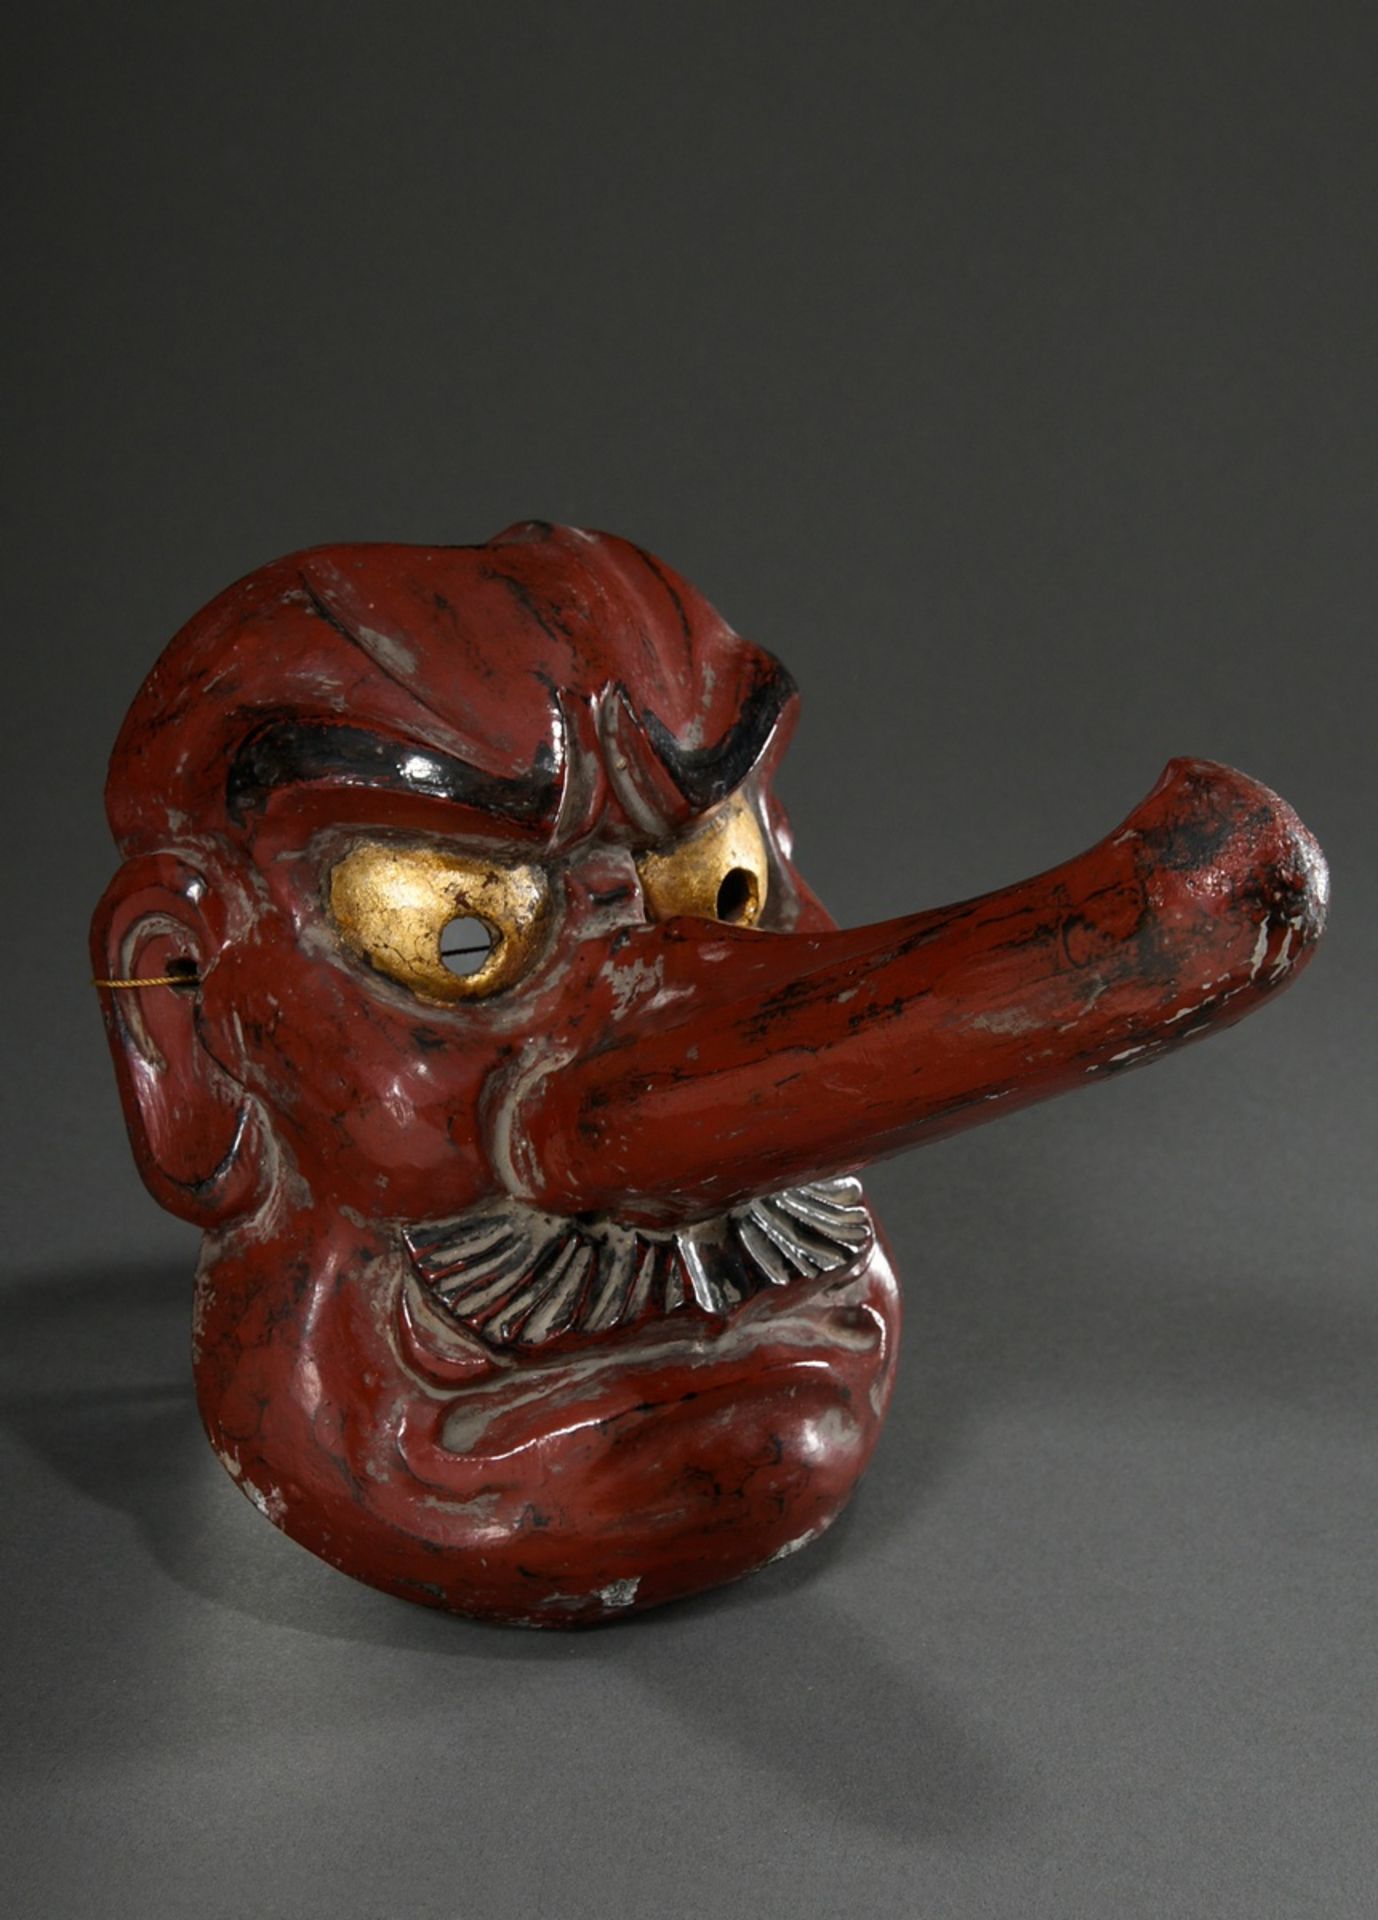 Kagura mask "Long-nosed Tengu", wood with red lacquer finish, Japan, 19th c., h. 20.5cm, partly dam - Image 2 of 5